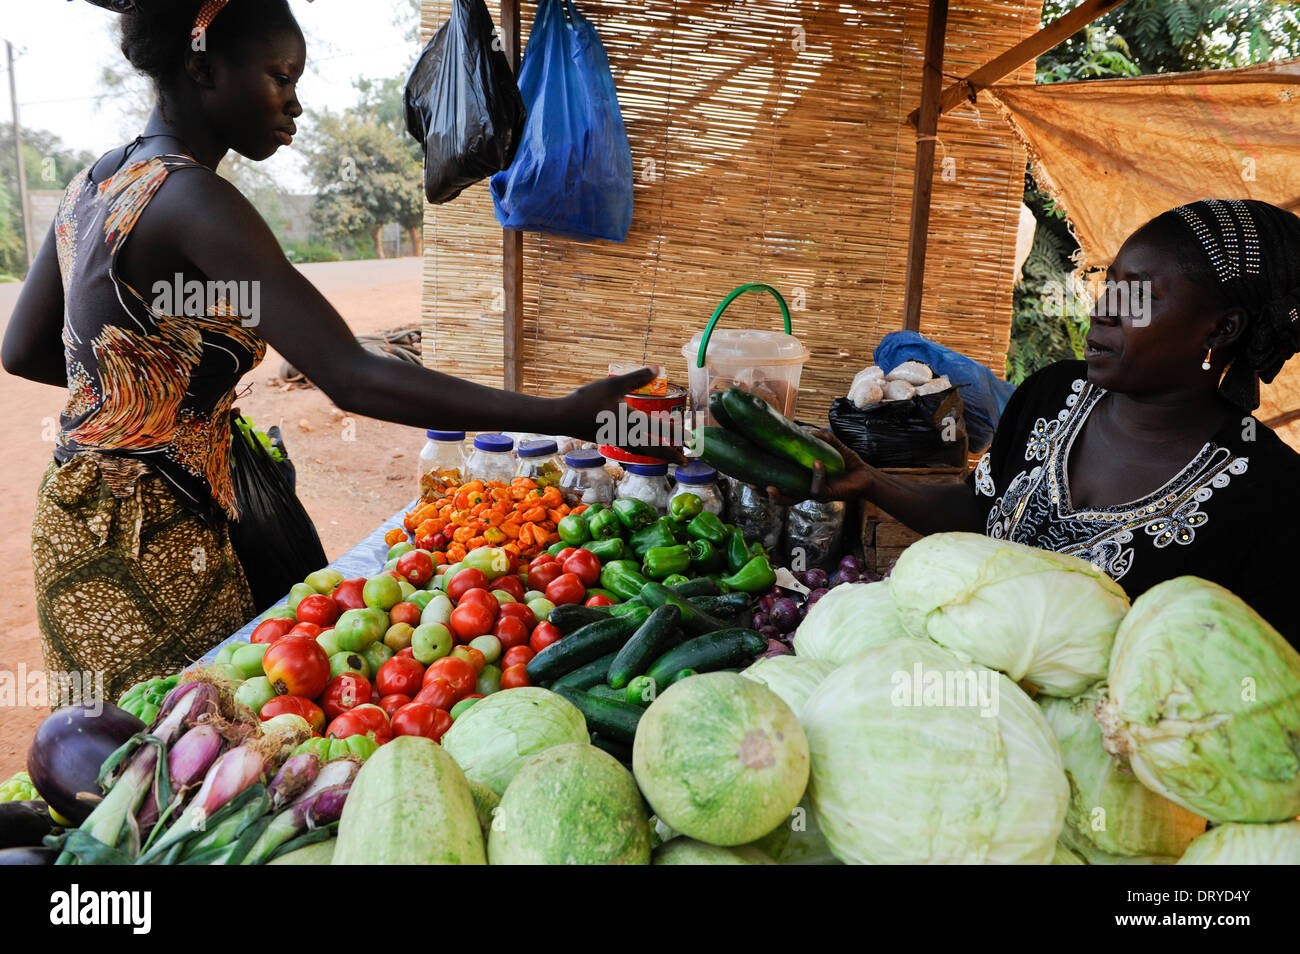 BURKINA FASO Kaya, diocese bank gives micro loan for women for income generation, women grow and sell vegetables directly at market Stock Photo